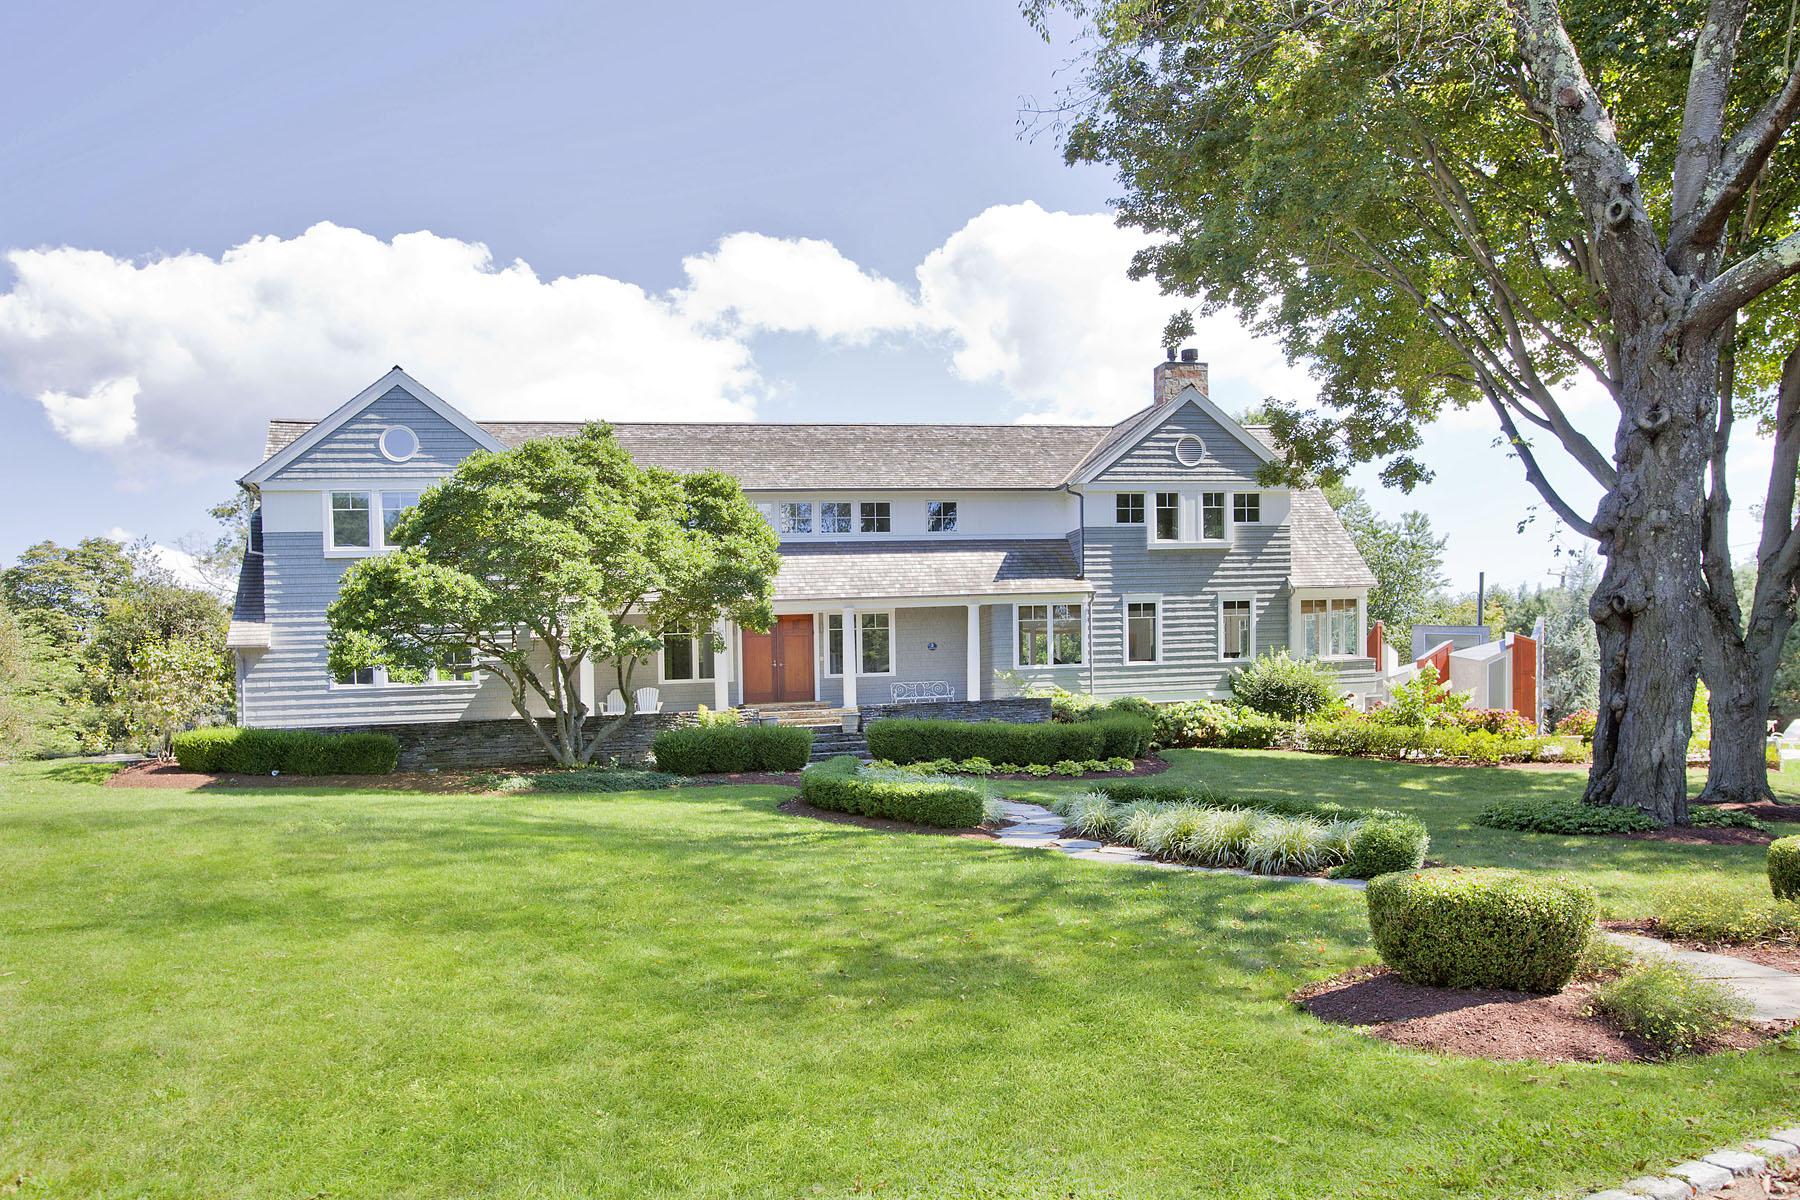 On the Market: Award-winning Westport property featured in Architectural Digest